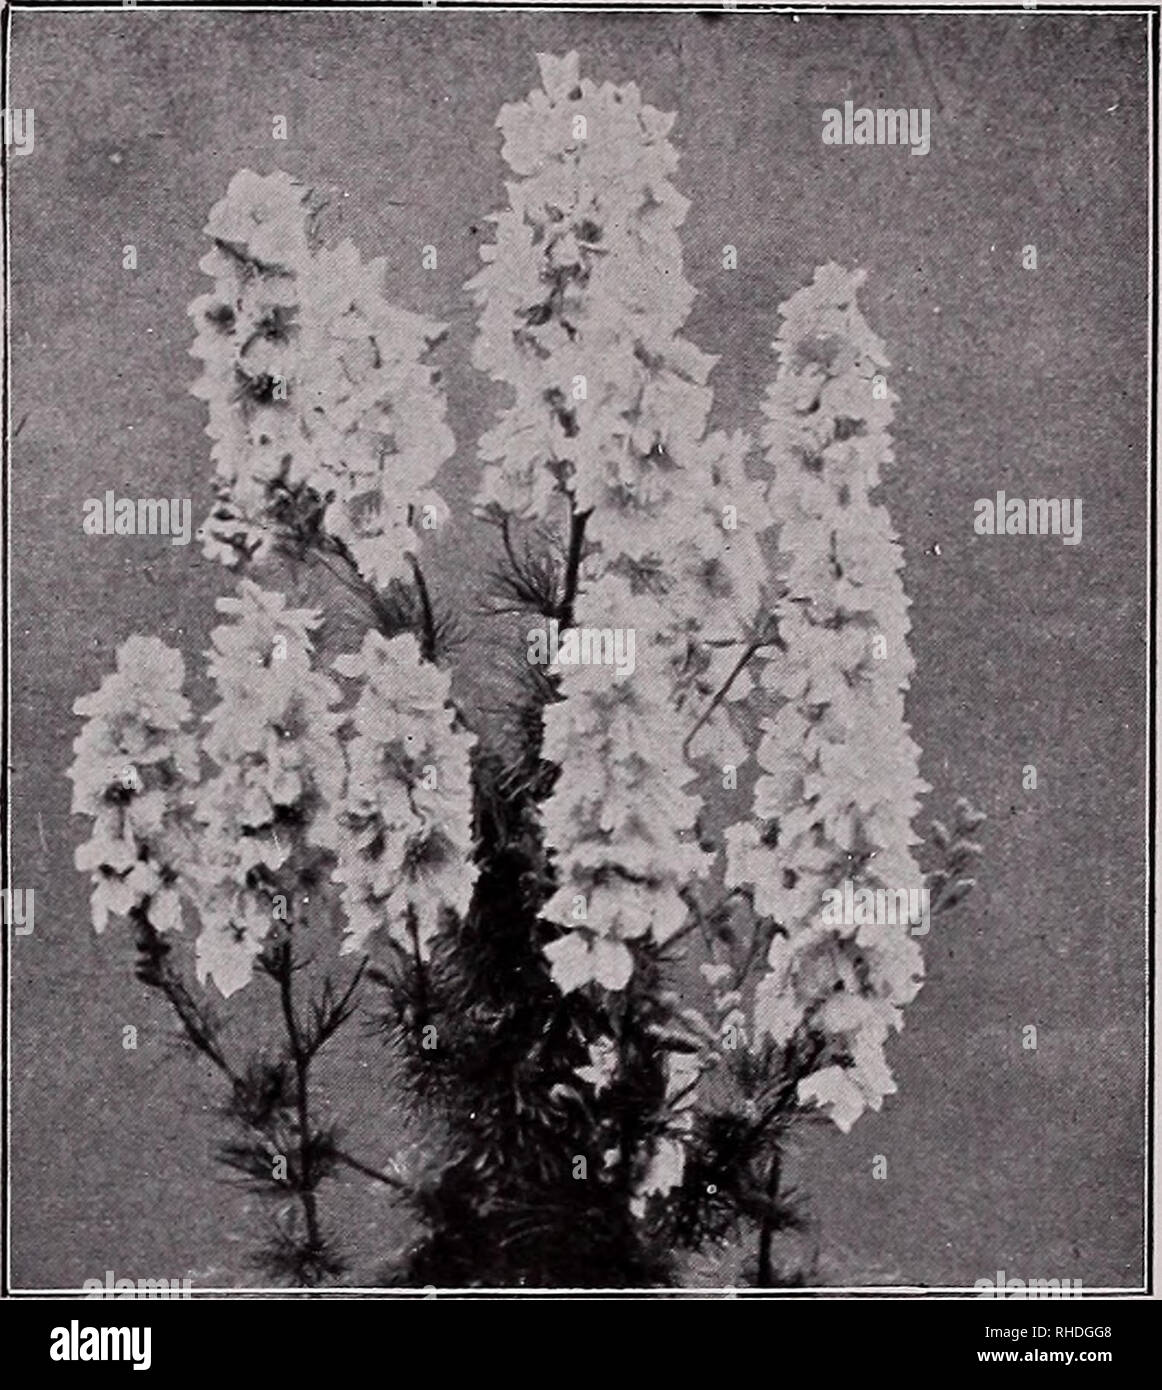 . Book for florists. Flowers Seeds Catalogs; Bulbs (Plants) Seedlings Catalogs; Vegetables Seeds Catalogs; Trees Seeds Catalogs; Horticulture Equipment and supplies Catalogs. ¥&amp;u©2aAS§»§ sign© UTomig, &lt;sm:i 11 EXACUM Affine. Blue. Fine for pots and bas- Trade pkt. Oz. kets %, oz., $1.60; 1,000 seeds, $1.00 GERBERA Jamesonii Hybrids (Transvaal Daisy). The Daisy-like blossoms, 2 to 4 inches across, being borne on long stems, are unsurpassed as cut flow- ers. They are easily grown from seed and will ' commence flowering the first year. The colors in- clude a wilderness of tints, from pure  Stock Photo